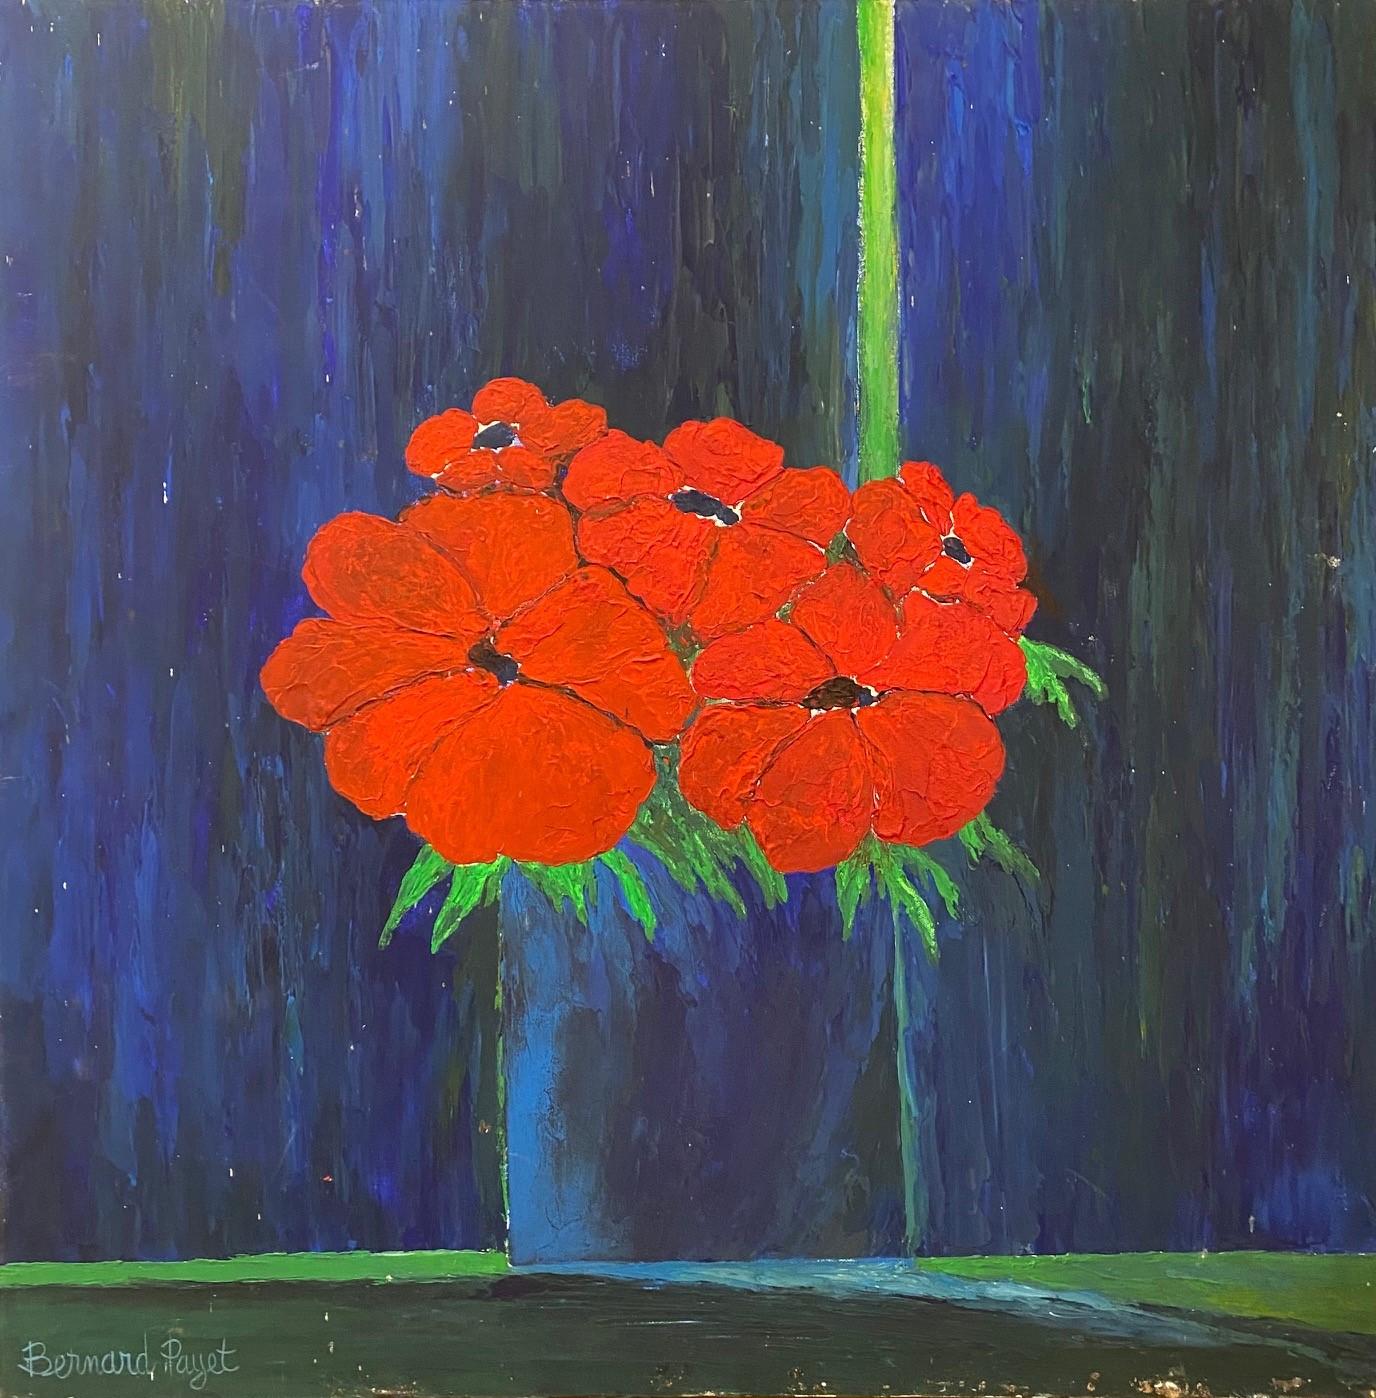 Bernard Payet Still-Life Painting - 'Red Bright Flowers on a Blue Background' Still Life Contemporary Mixed Media 